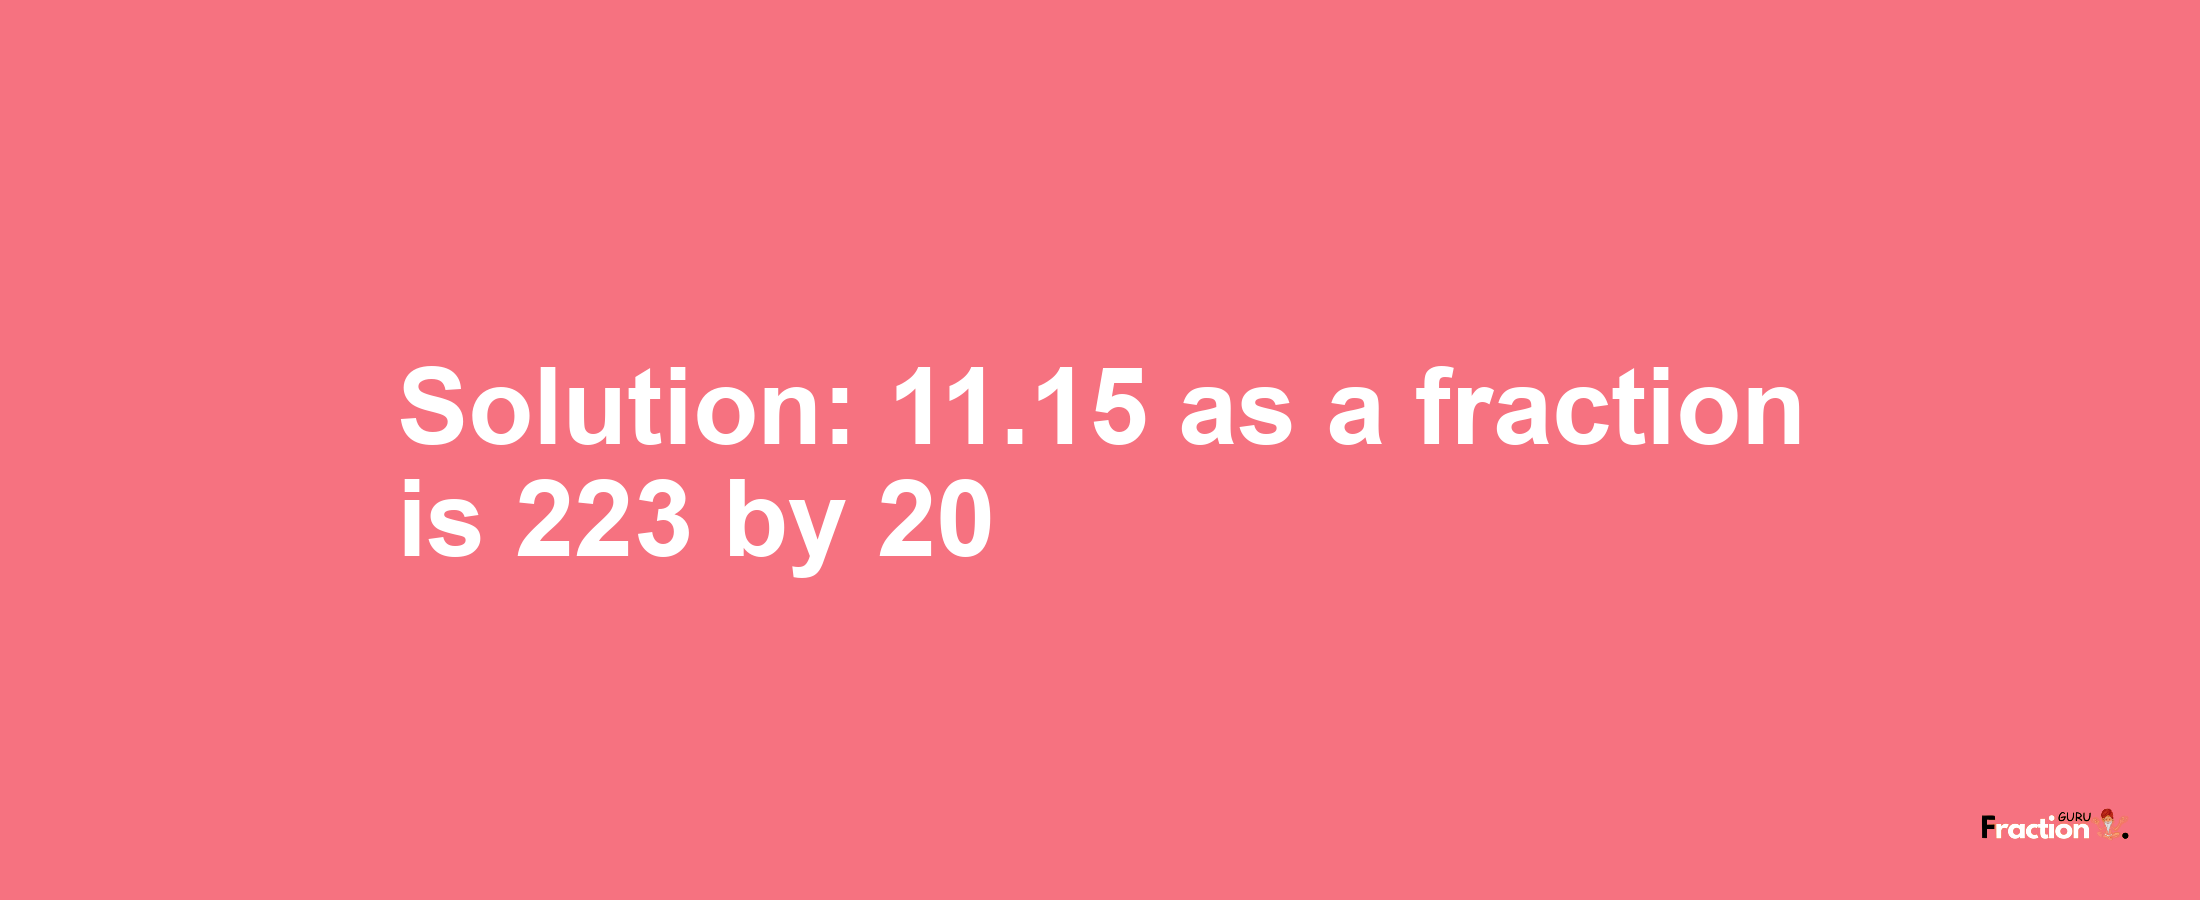 Solution:11.15 as a fraction is 223/20